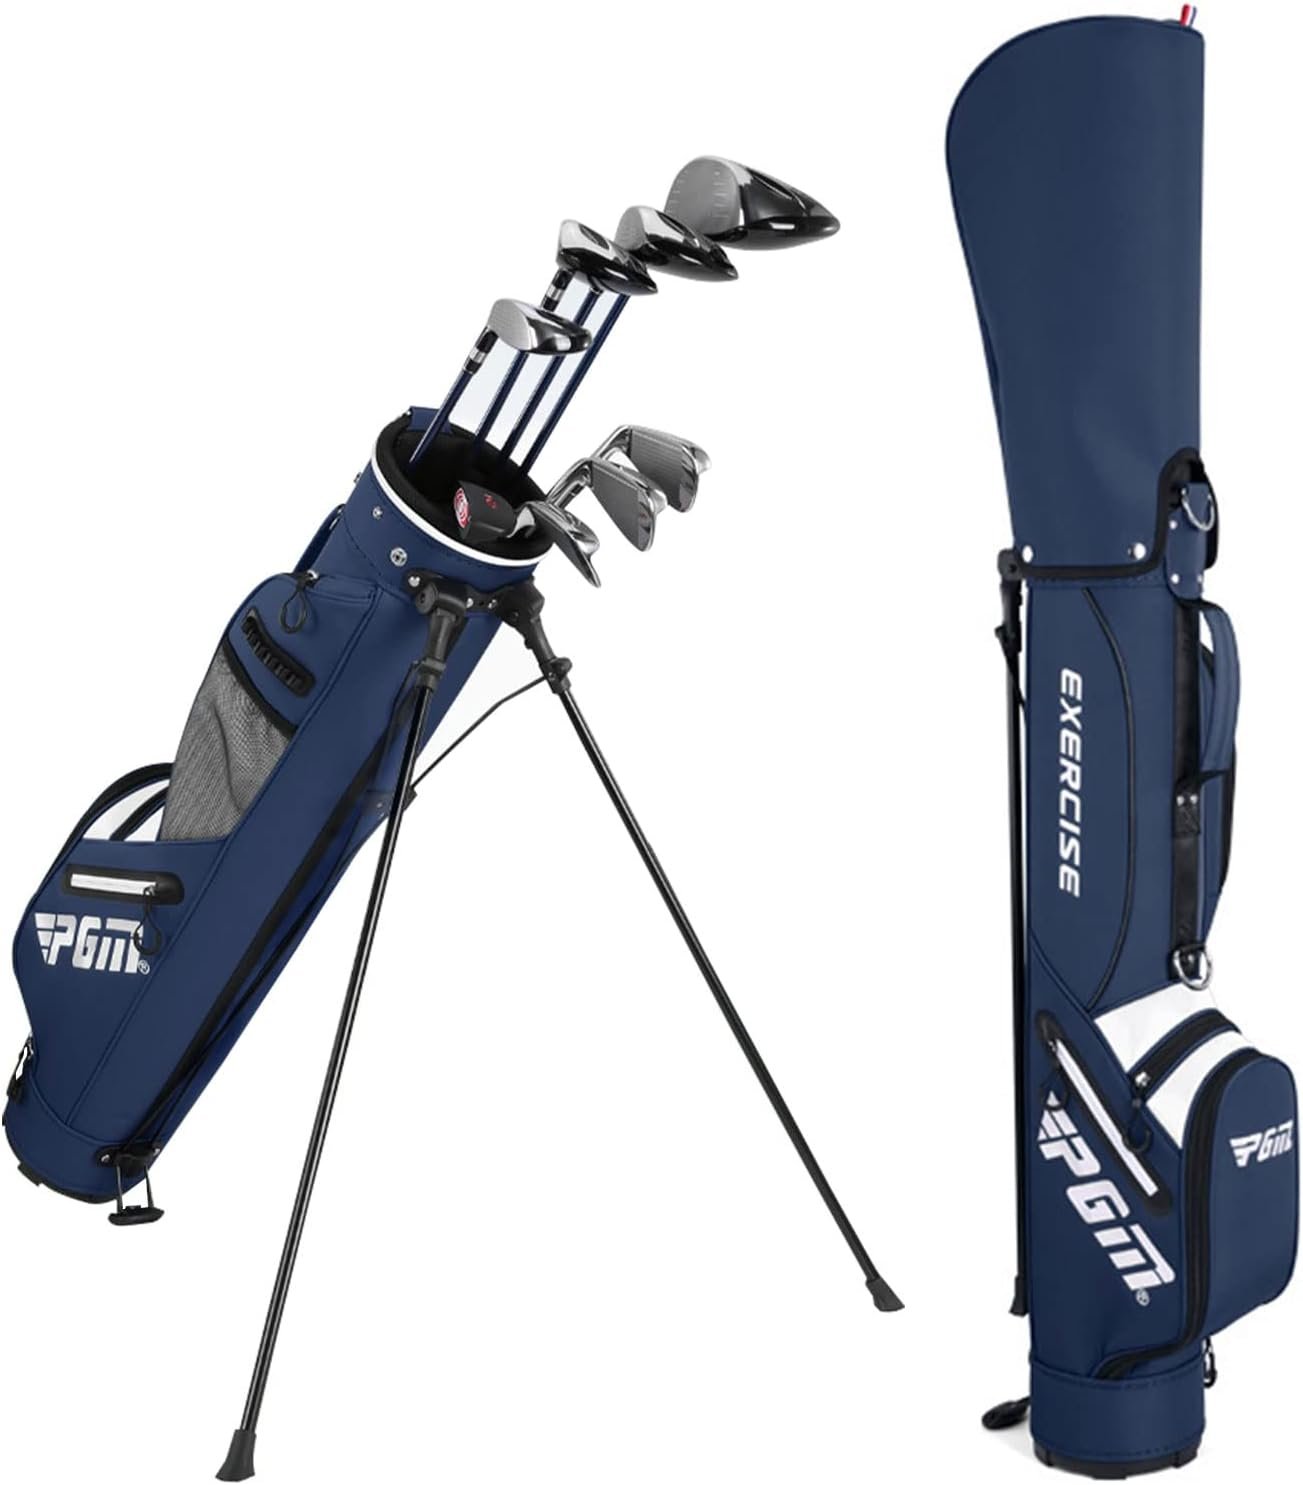 PGM Golf Sunday Stand Bags with Stands for Men Women,Easy to Carry  Durable Professional Pitch Golf Bag Ideal for The Driving Range,Par 3 and Executive Courses Travel Lightweight Waterproof Blue